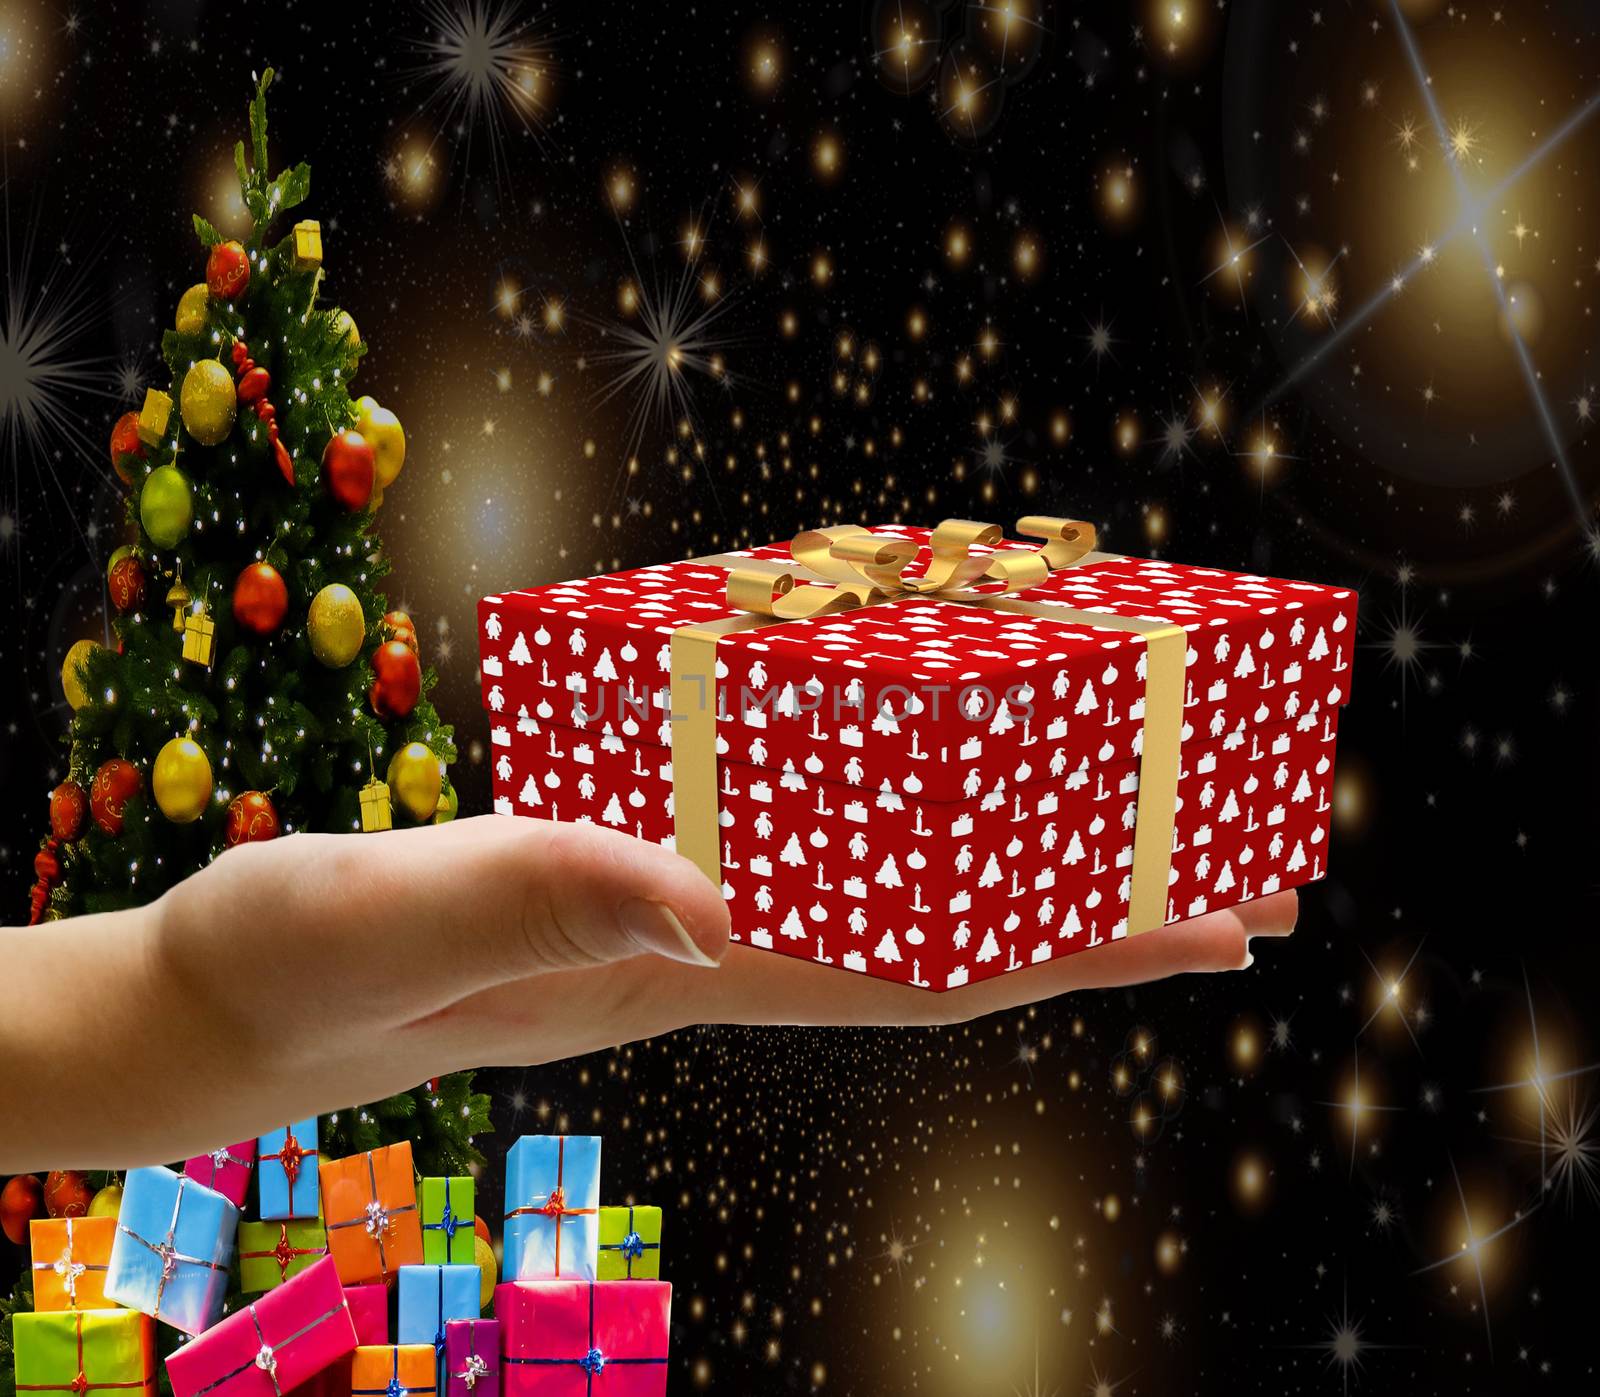 Christmas concept a hand holding a decorated wrapped christmas present box isolated on a christmas background with stars a tree and gifts by charlottebleijenberg